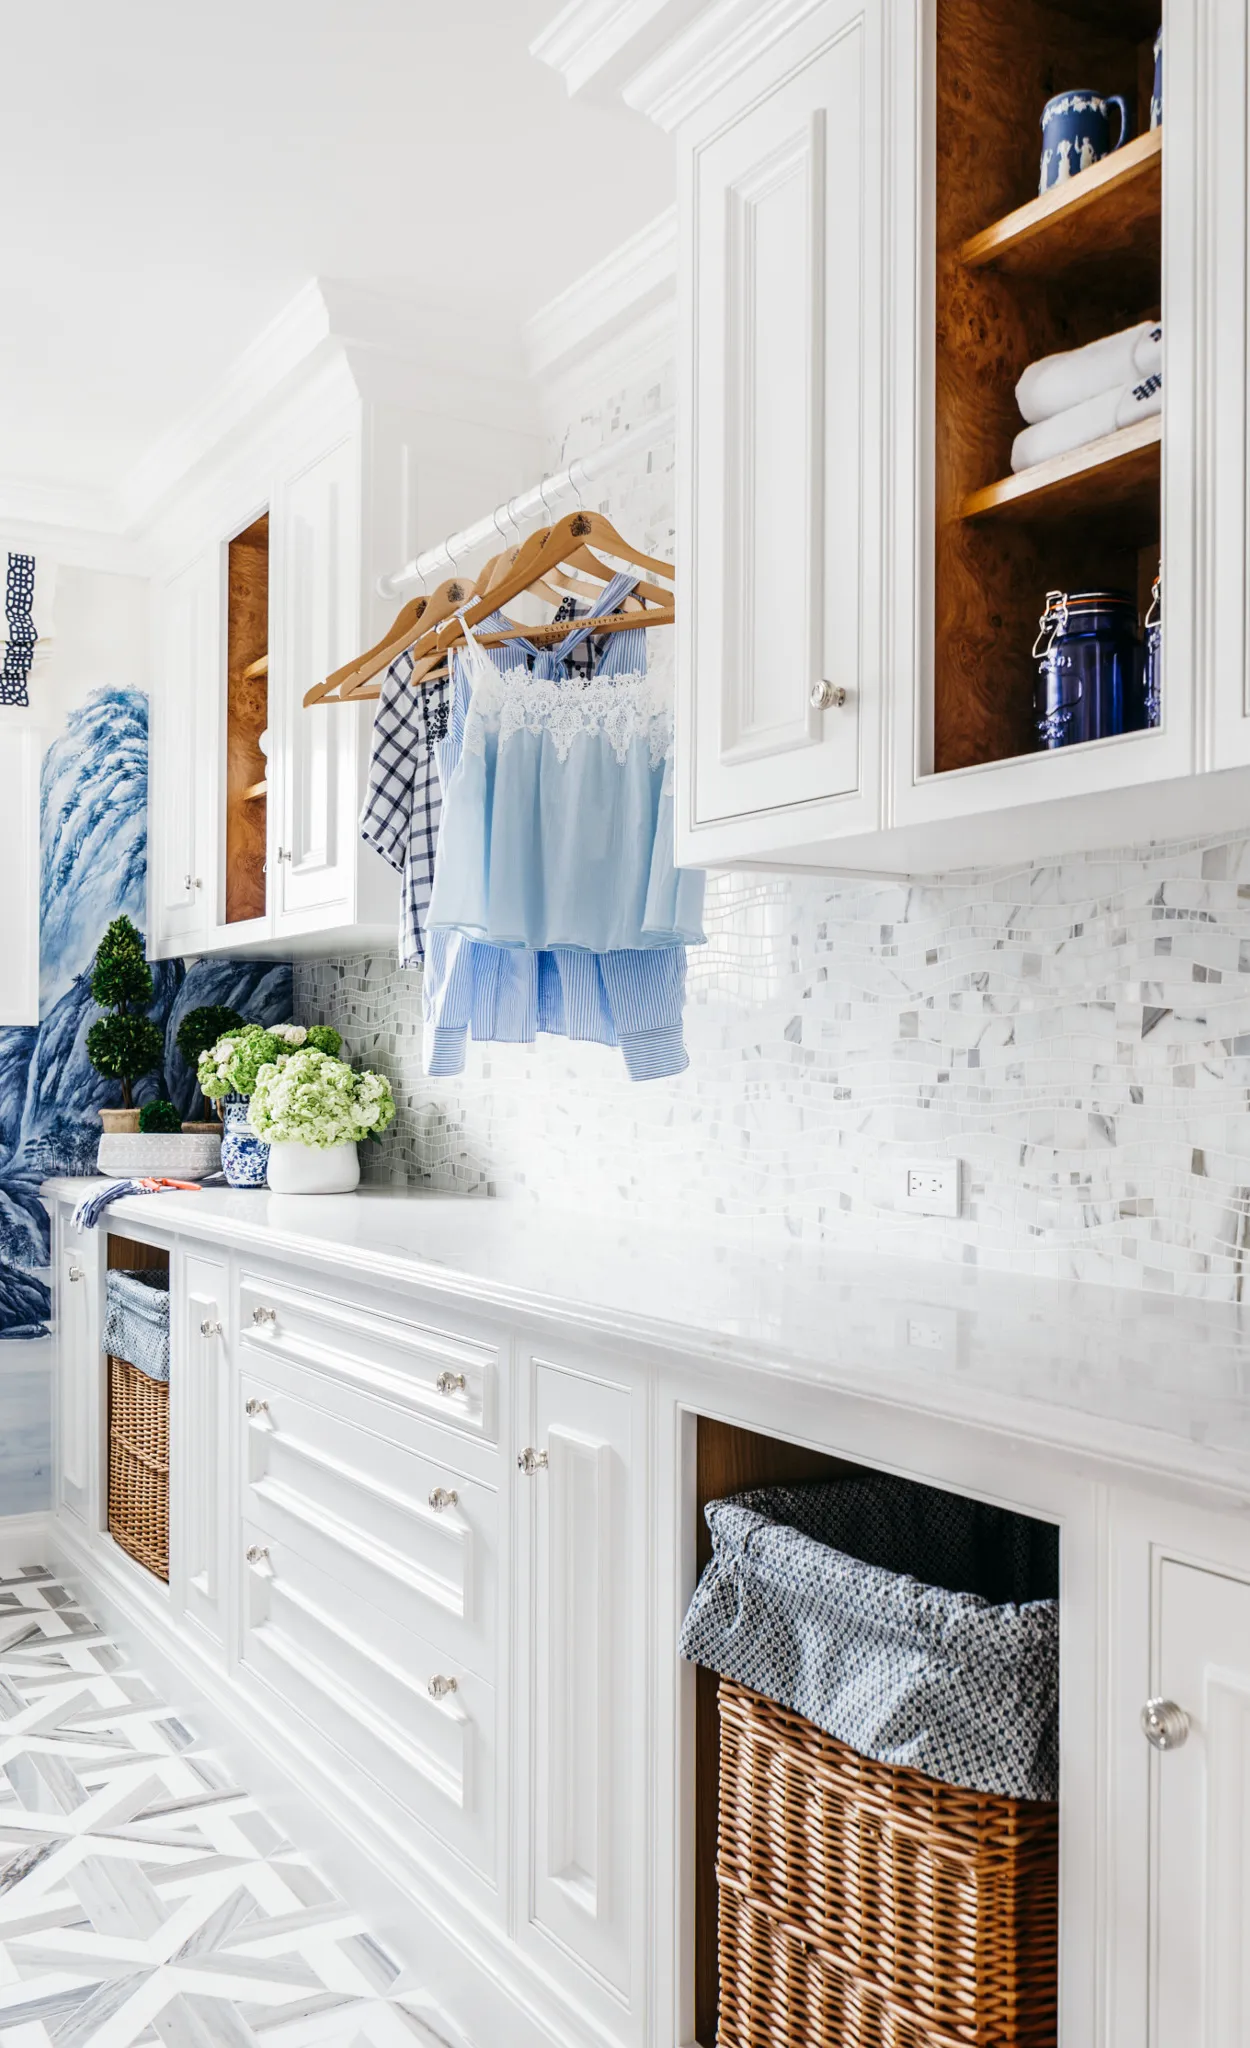 a blue and white themed laundry room featuring Cambria Ella quartz countertops, shelving, and two built-in laundry hampers with a geometric tile backsplash.